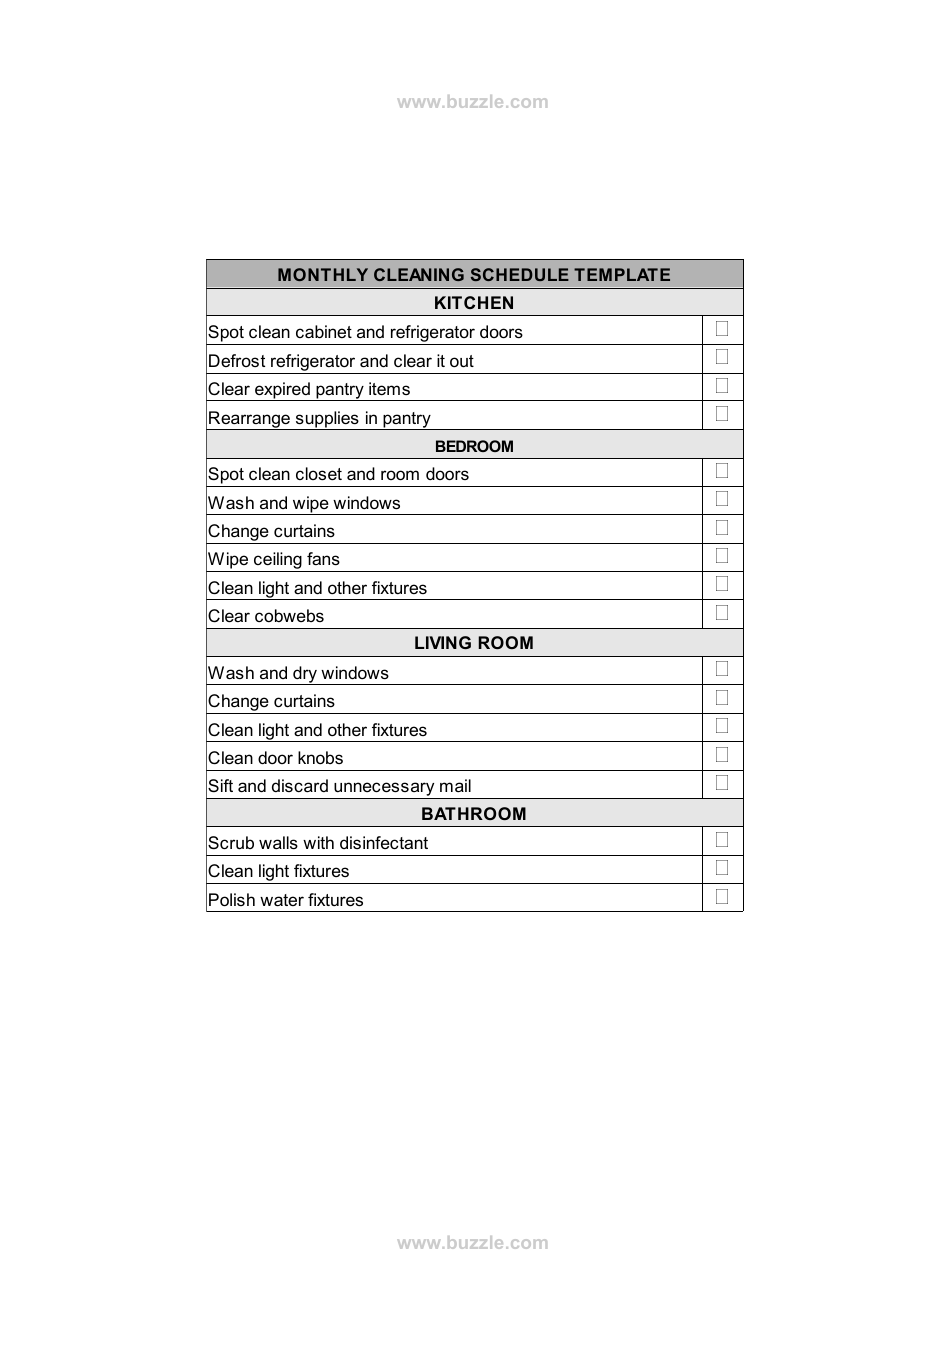 Monthly Cleaning Schedule Template, Page 1